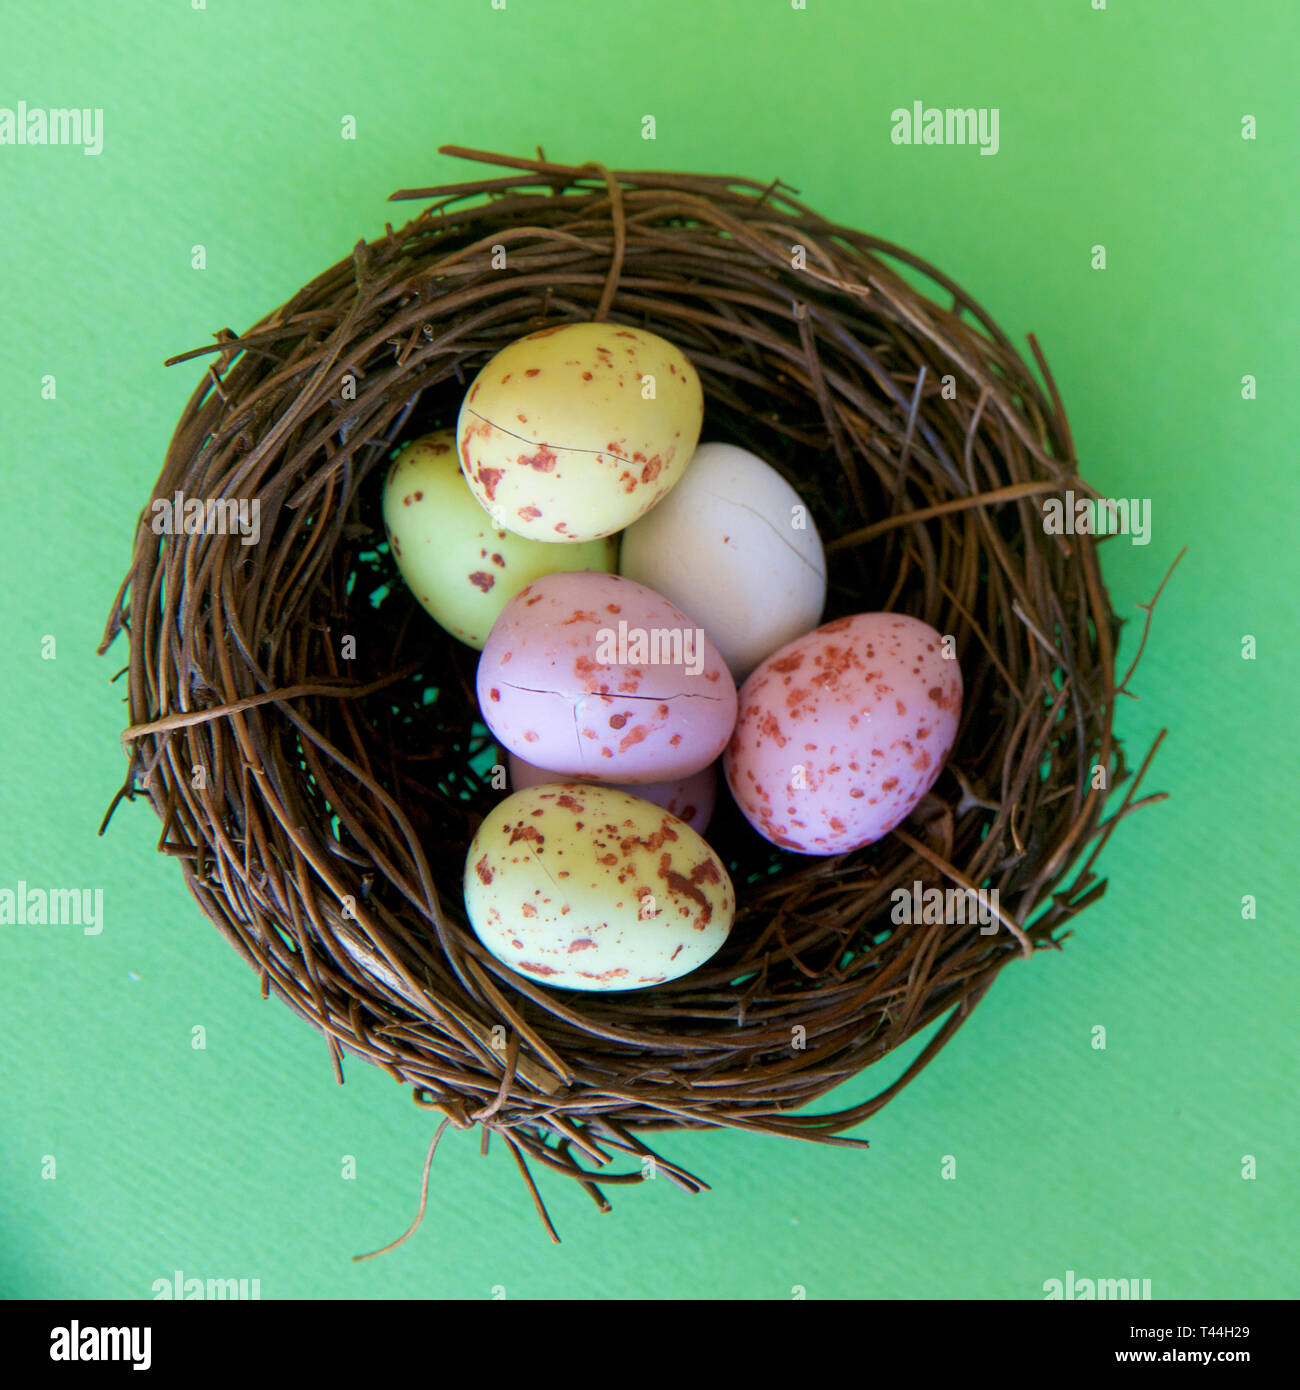 Speckled speckled Easter eggs in a brown nest signifying new life. Stock Photo